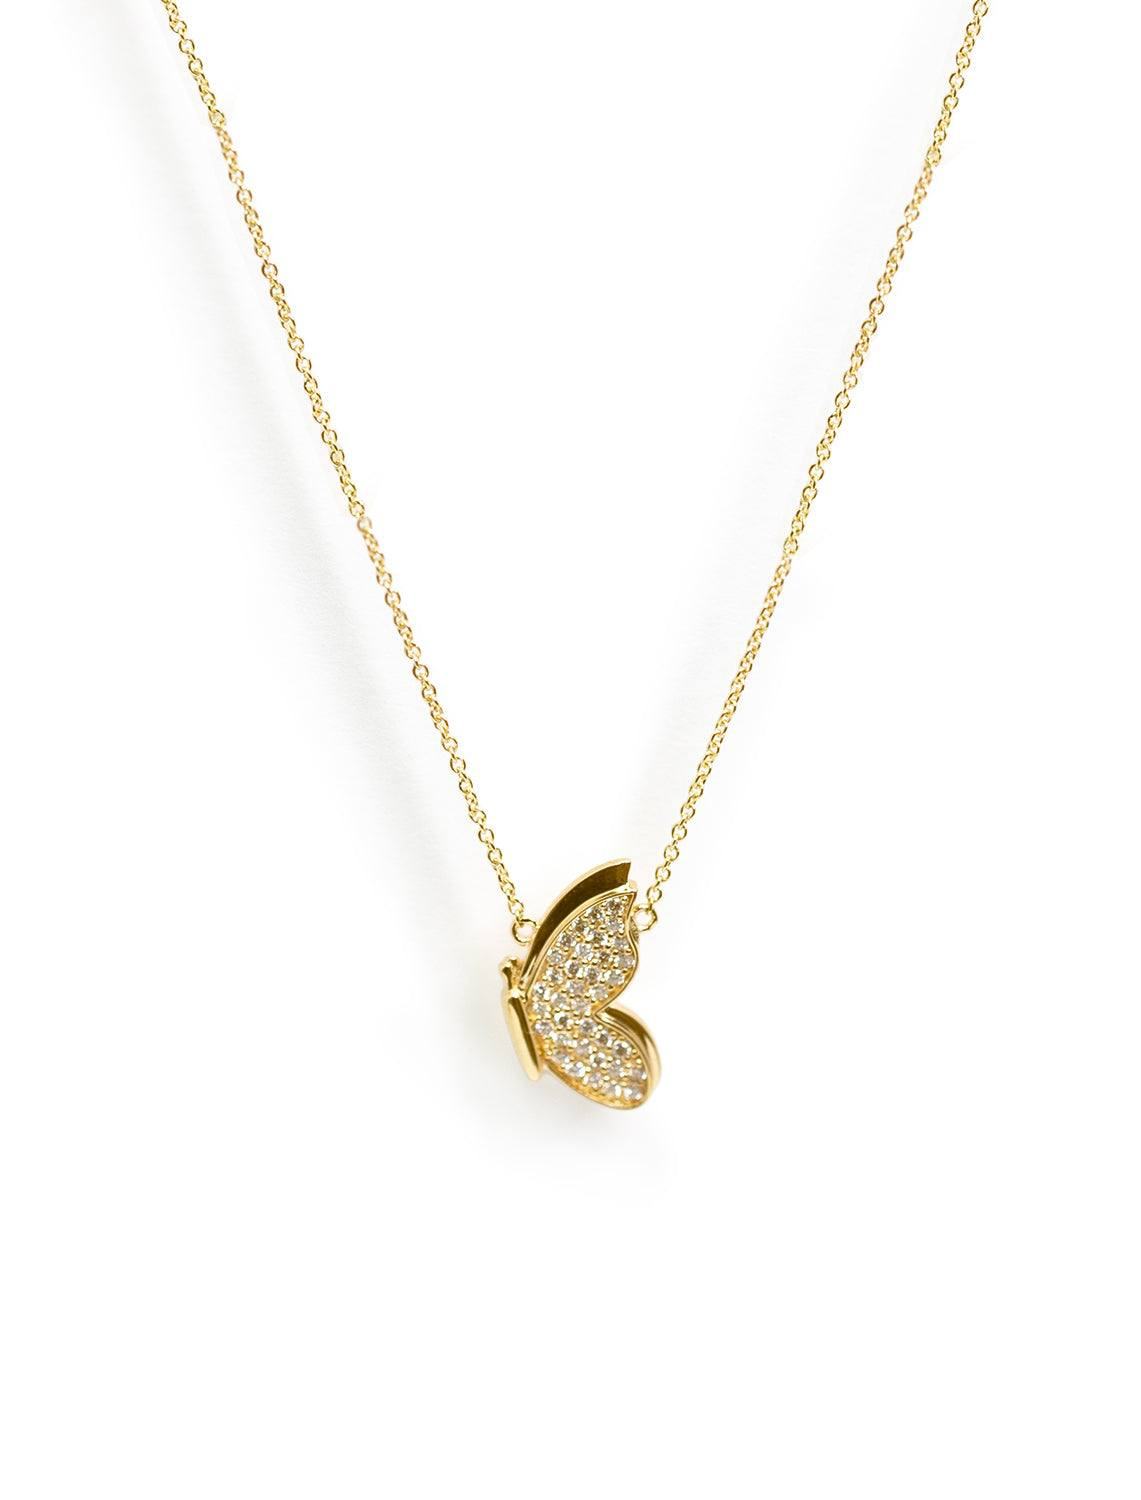 Sydney Evan Small Pave In Flight Butterfly Necklace